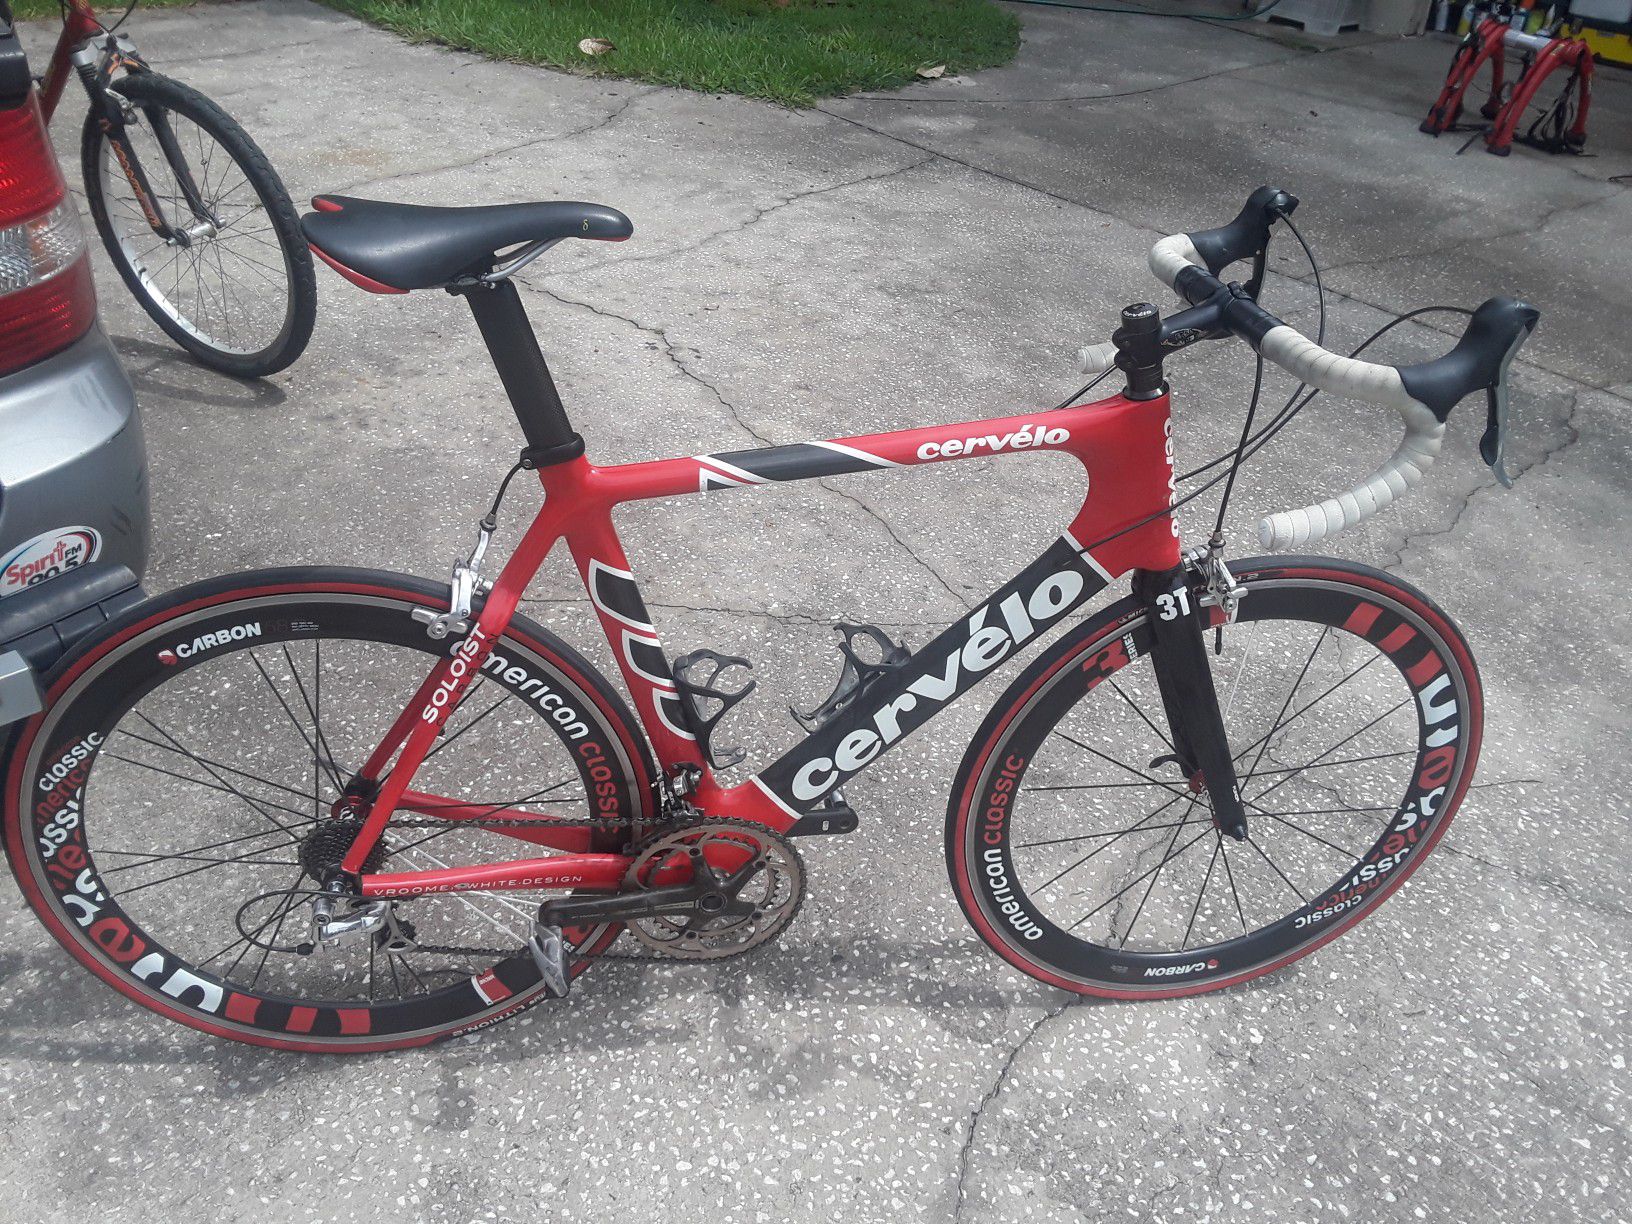 Cervelo Soloist Carbon road bike with Carbon American Classic wheels, 61cm - $1200 FIRM